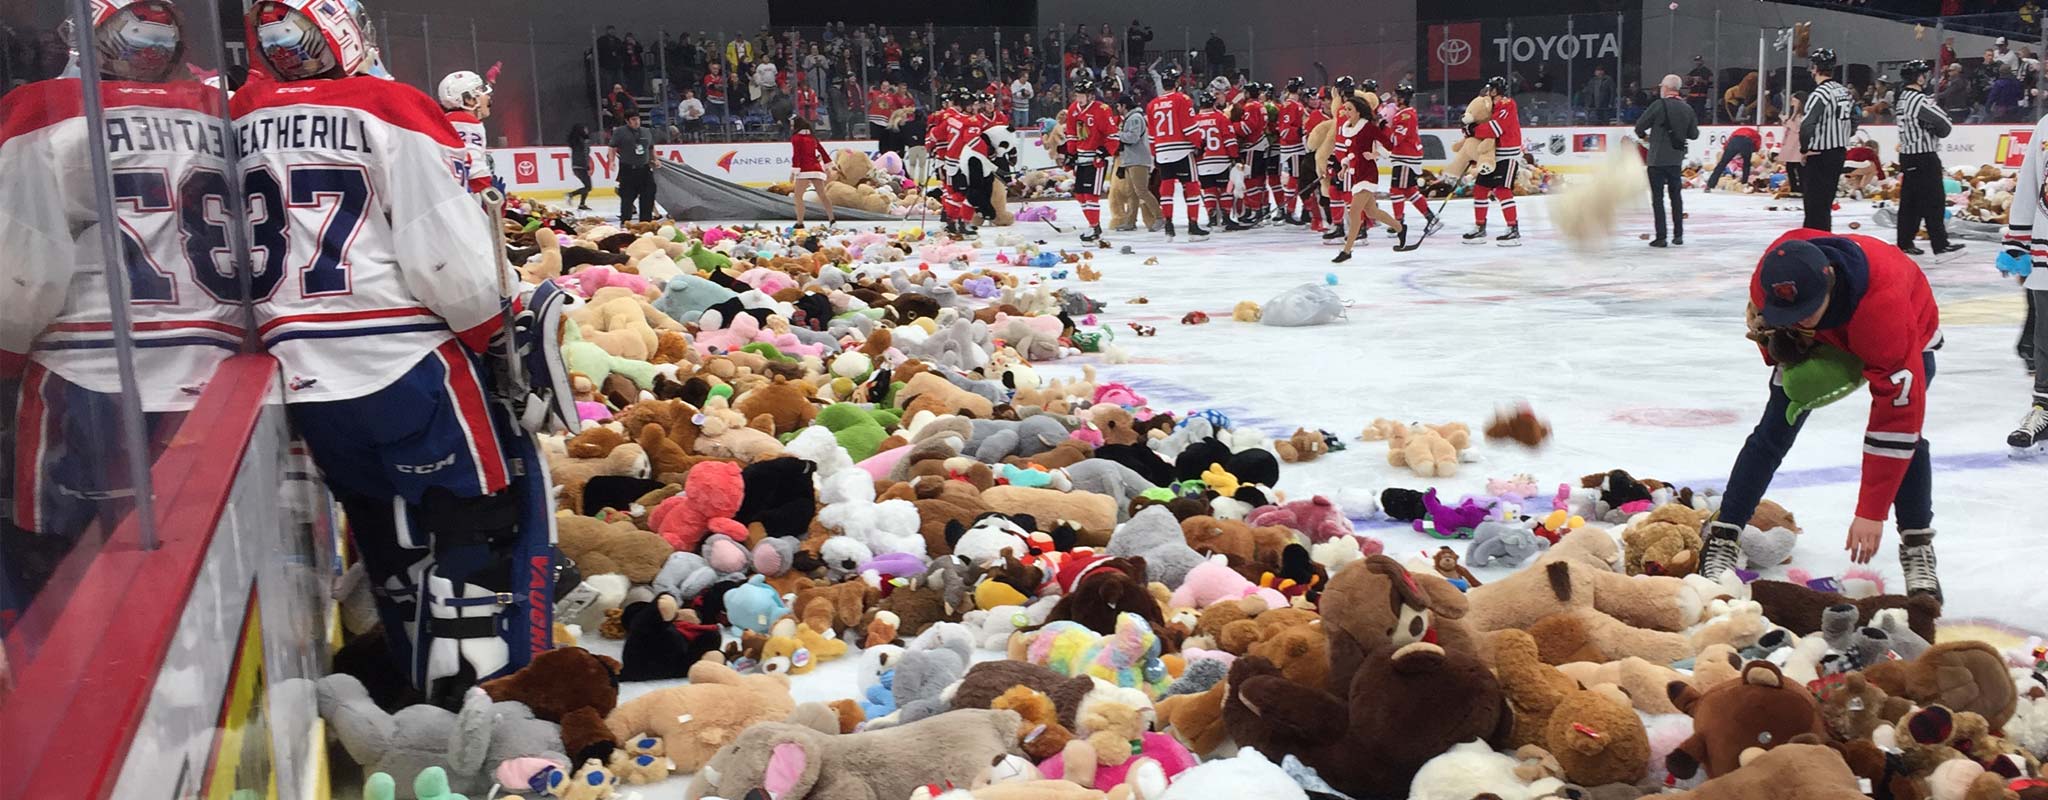 Ice rink full of hockey players and teddy bears after a teddy bear toss event.